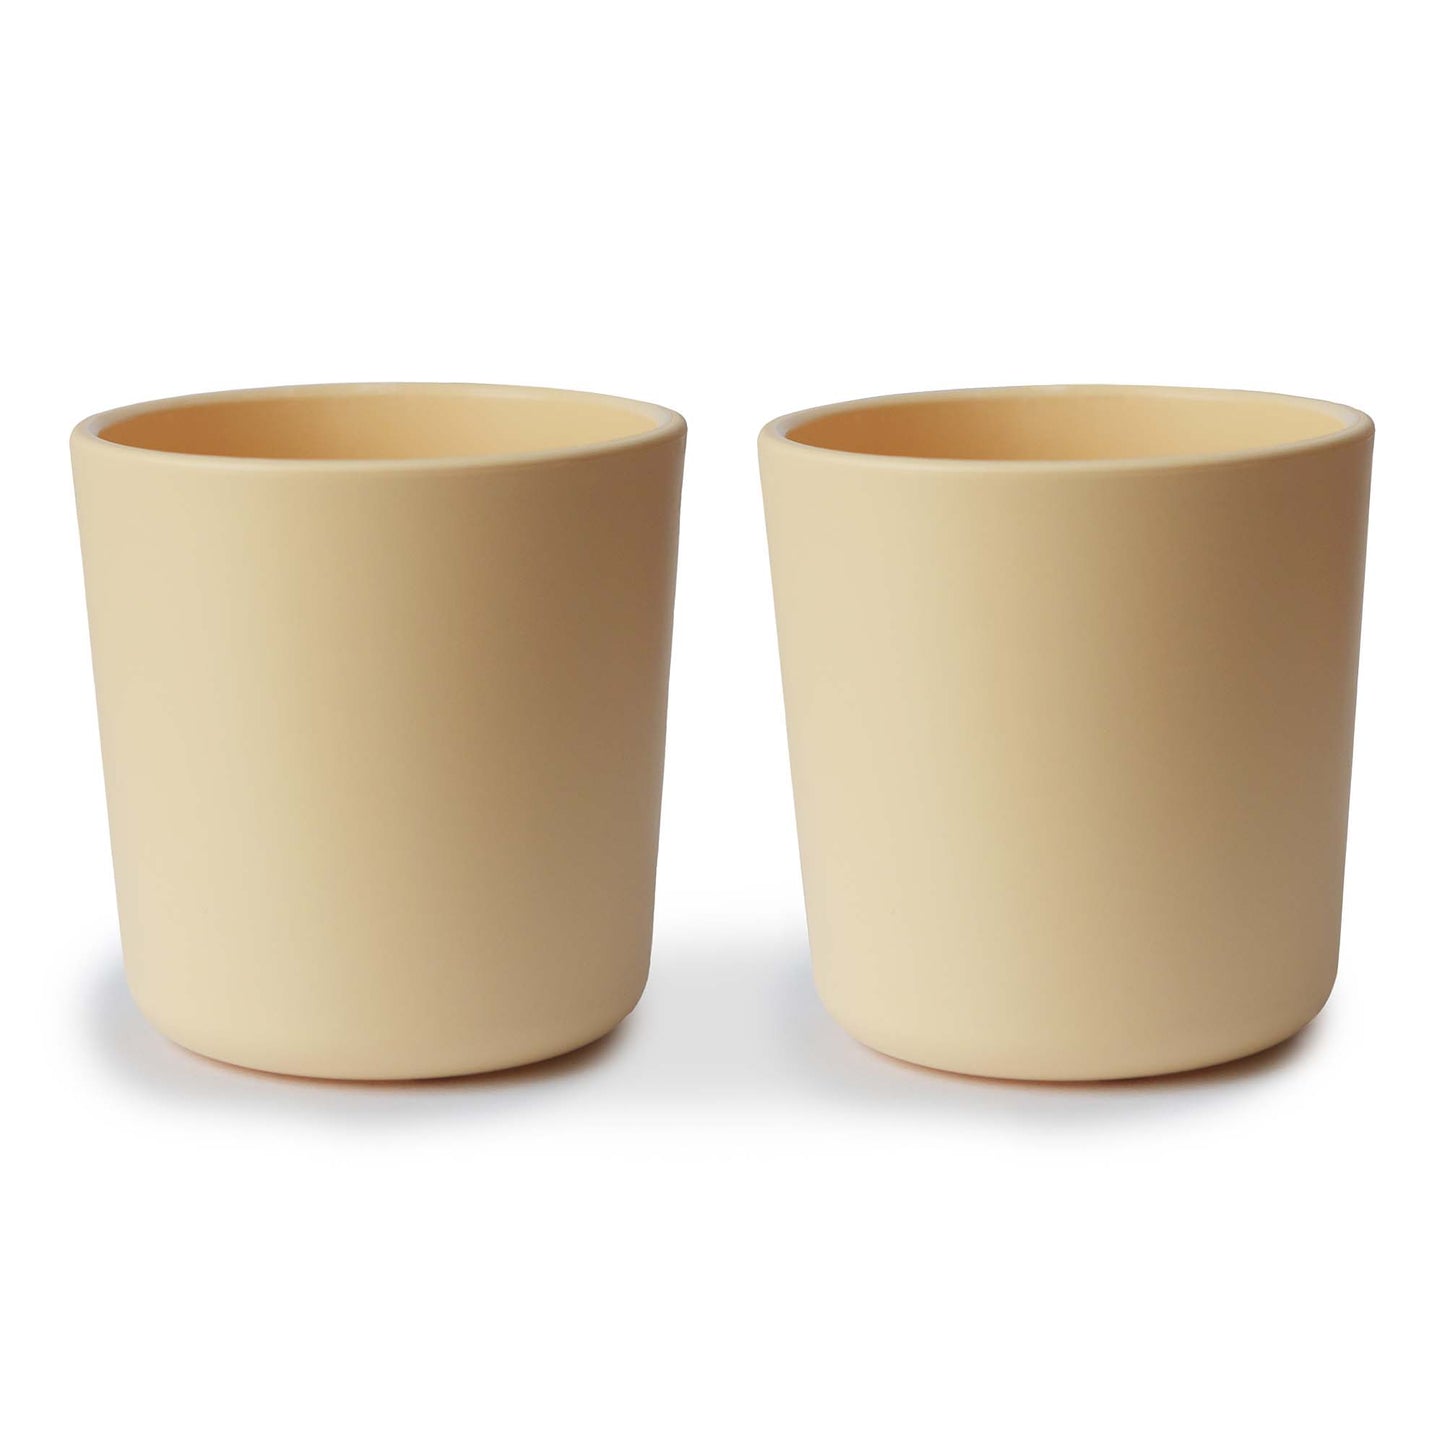 Copy of Dinnerware Cup - Set of 2 - Soft Lilac (7392574898354)